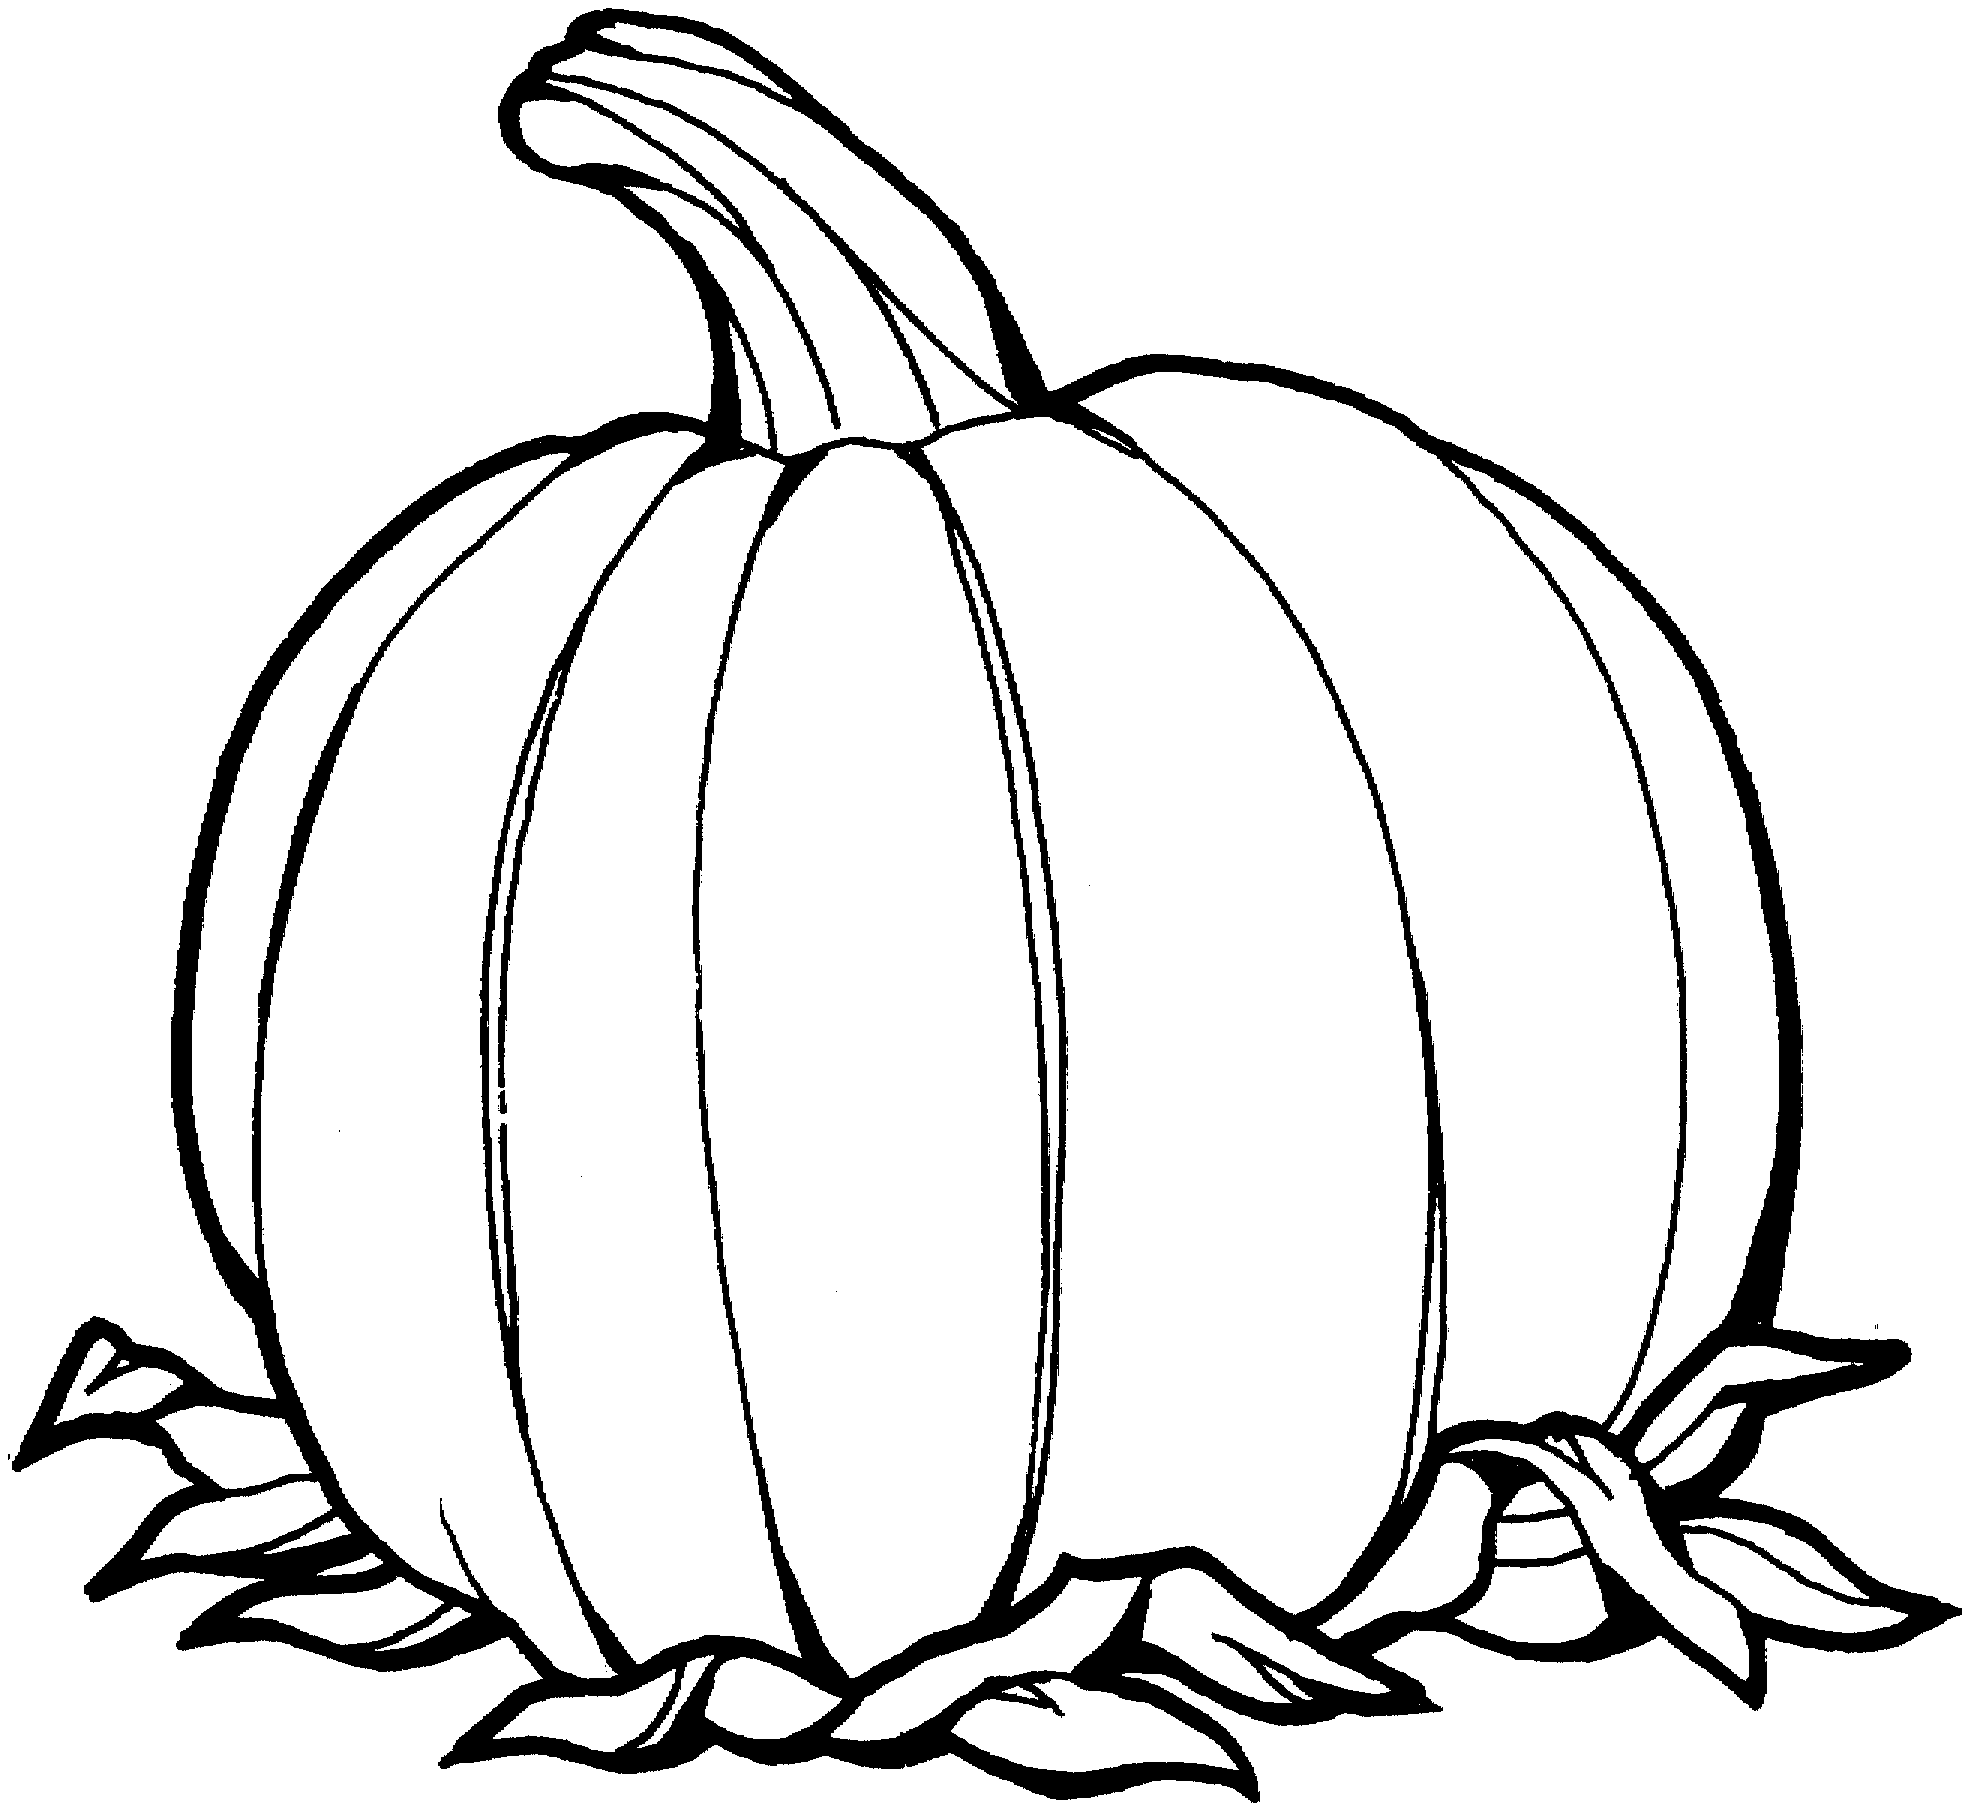 Pumpkin black and white smiley pumpkin clipart black and.